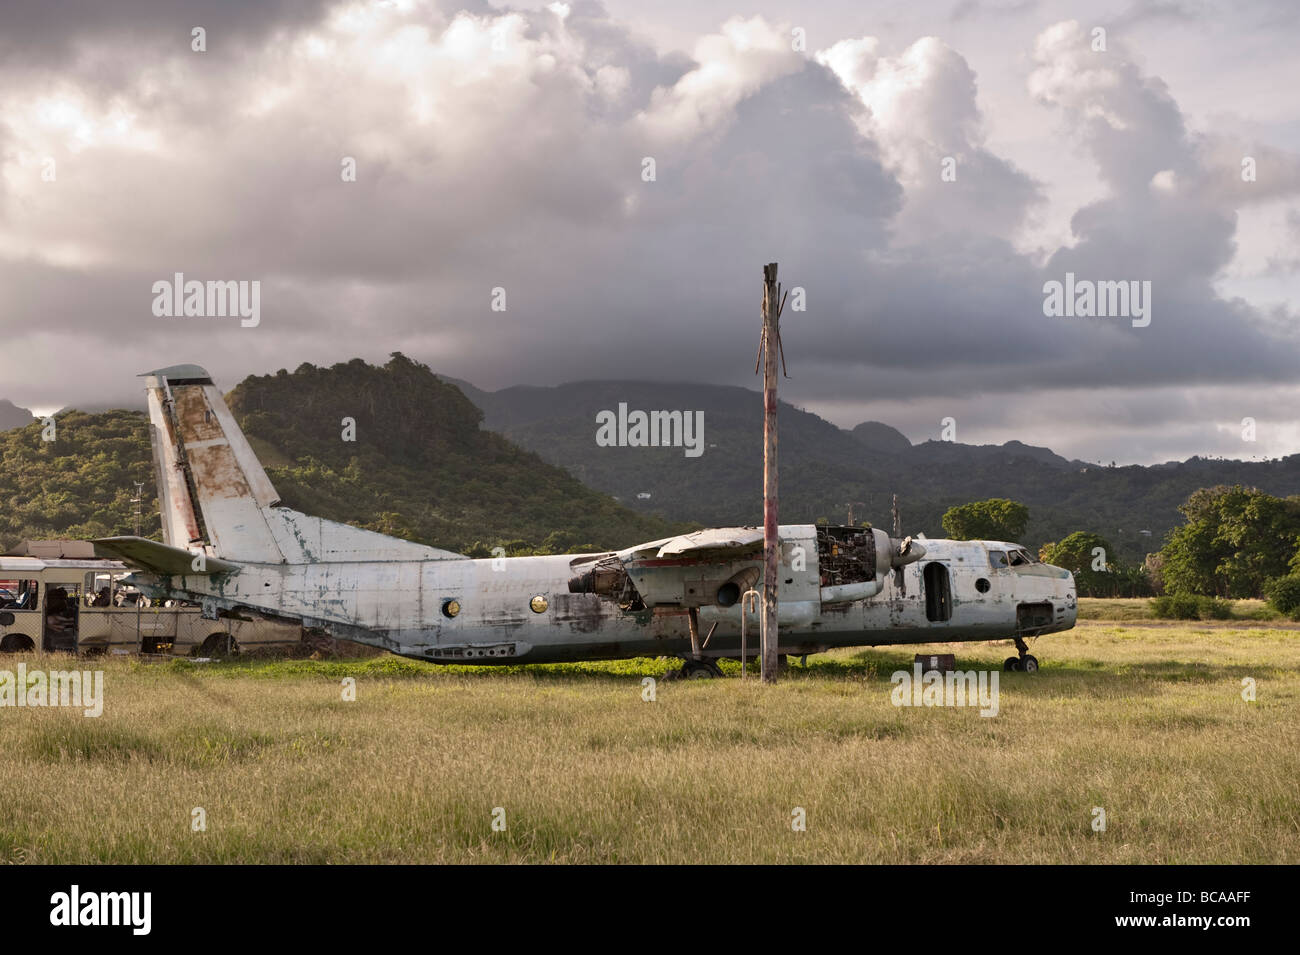 Abandonned old Russian built airplane operated by the Cubian military  at the disused Pearl's Airport in Grenada Stock Photo